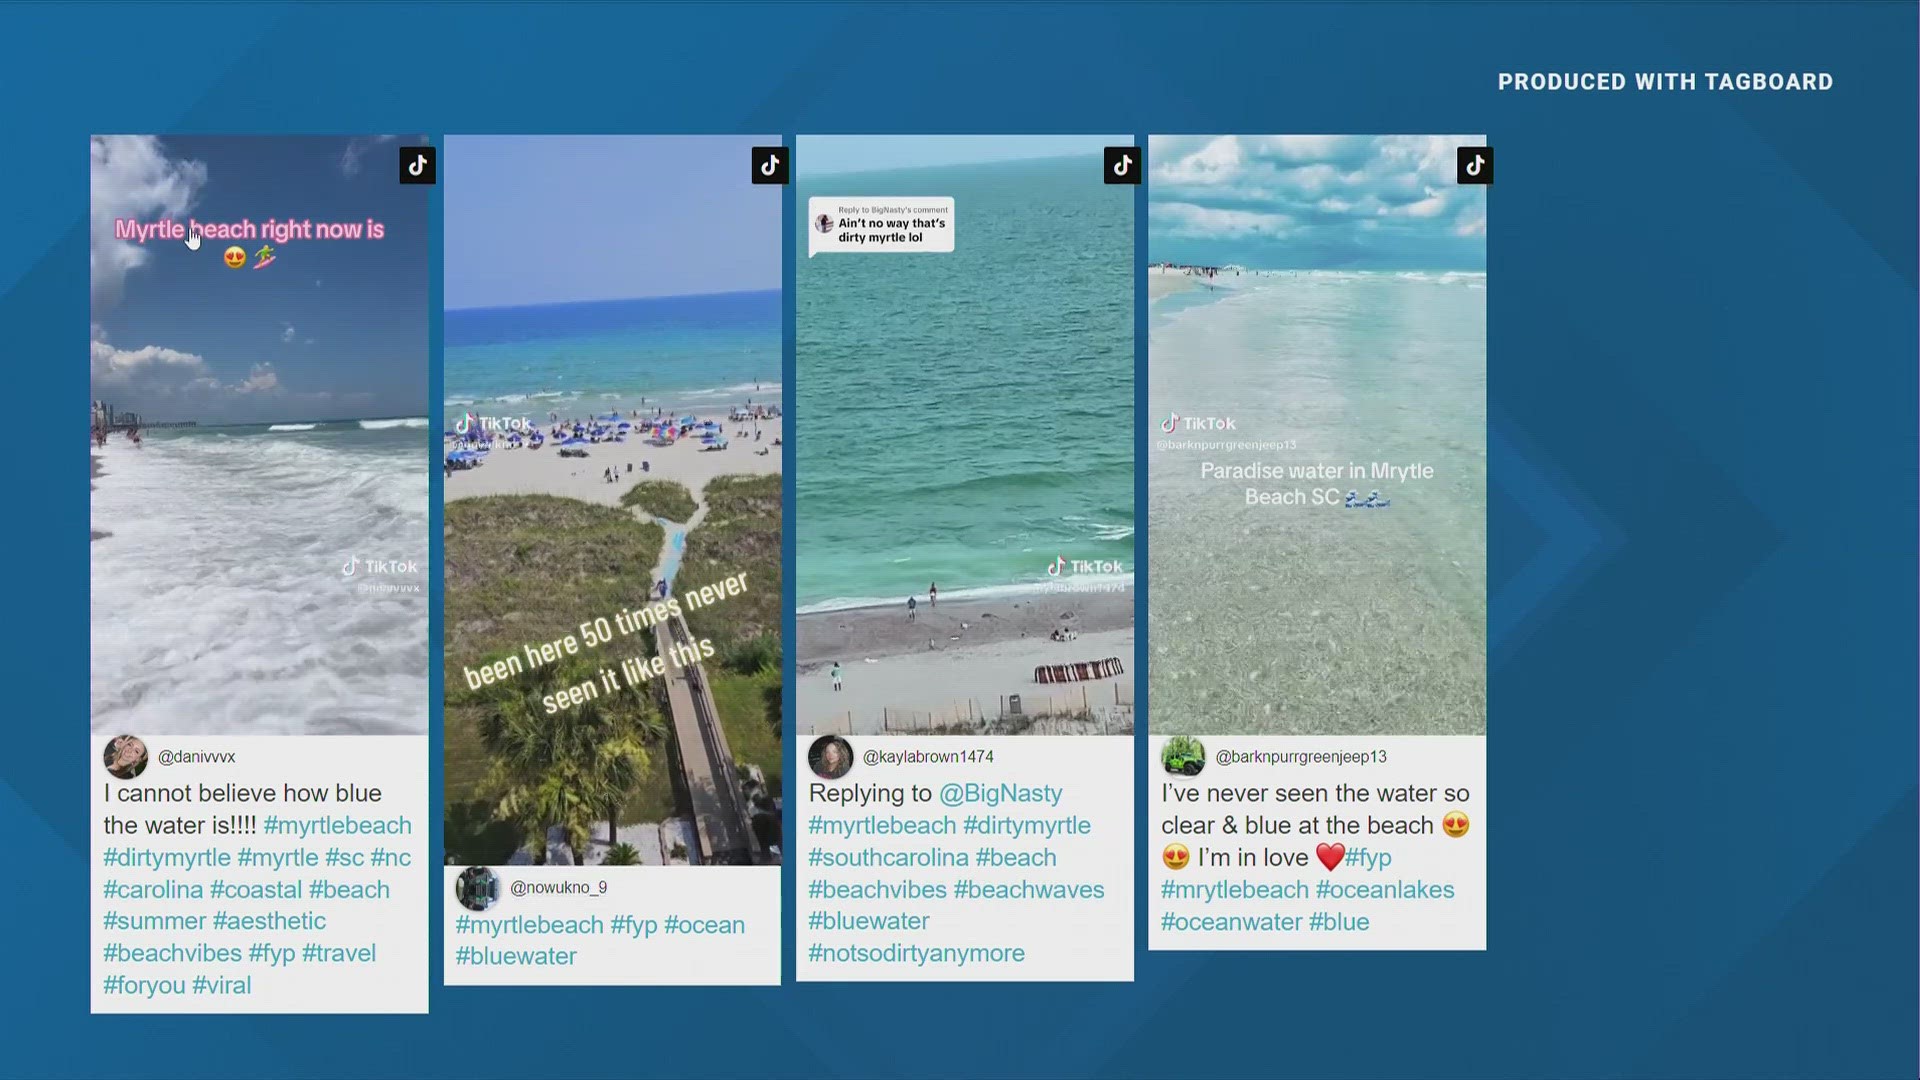 Social media filled up with posts from Myrtle Beach after people started sharing the waters of ‘Dirty Myrtle’ looking crystal clear.